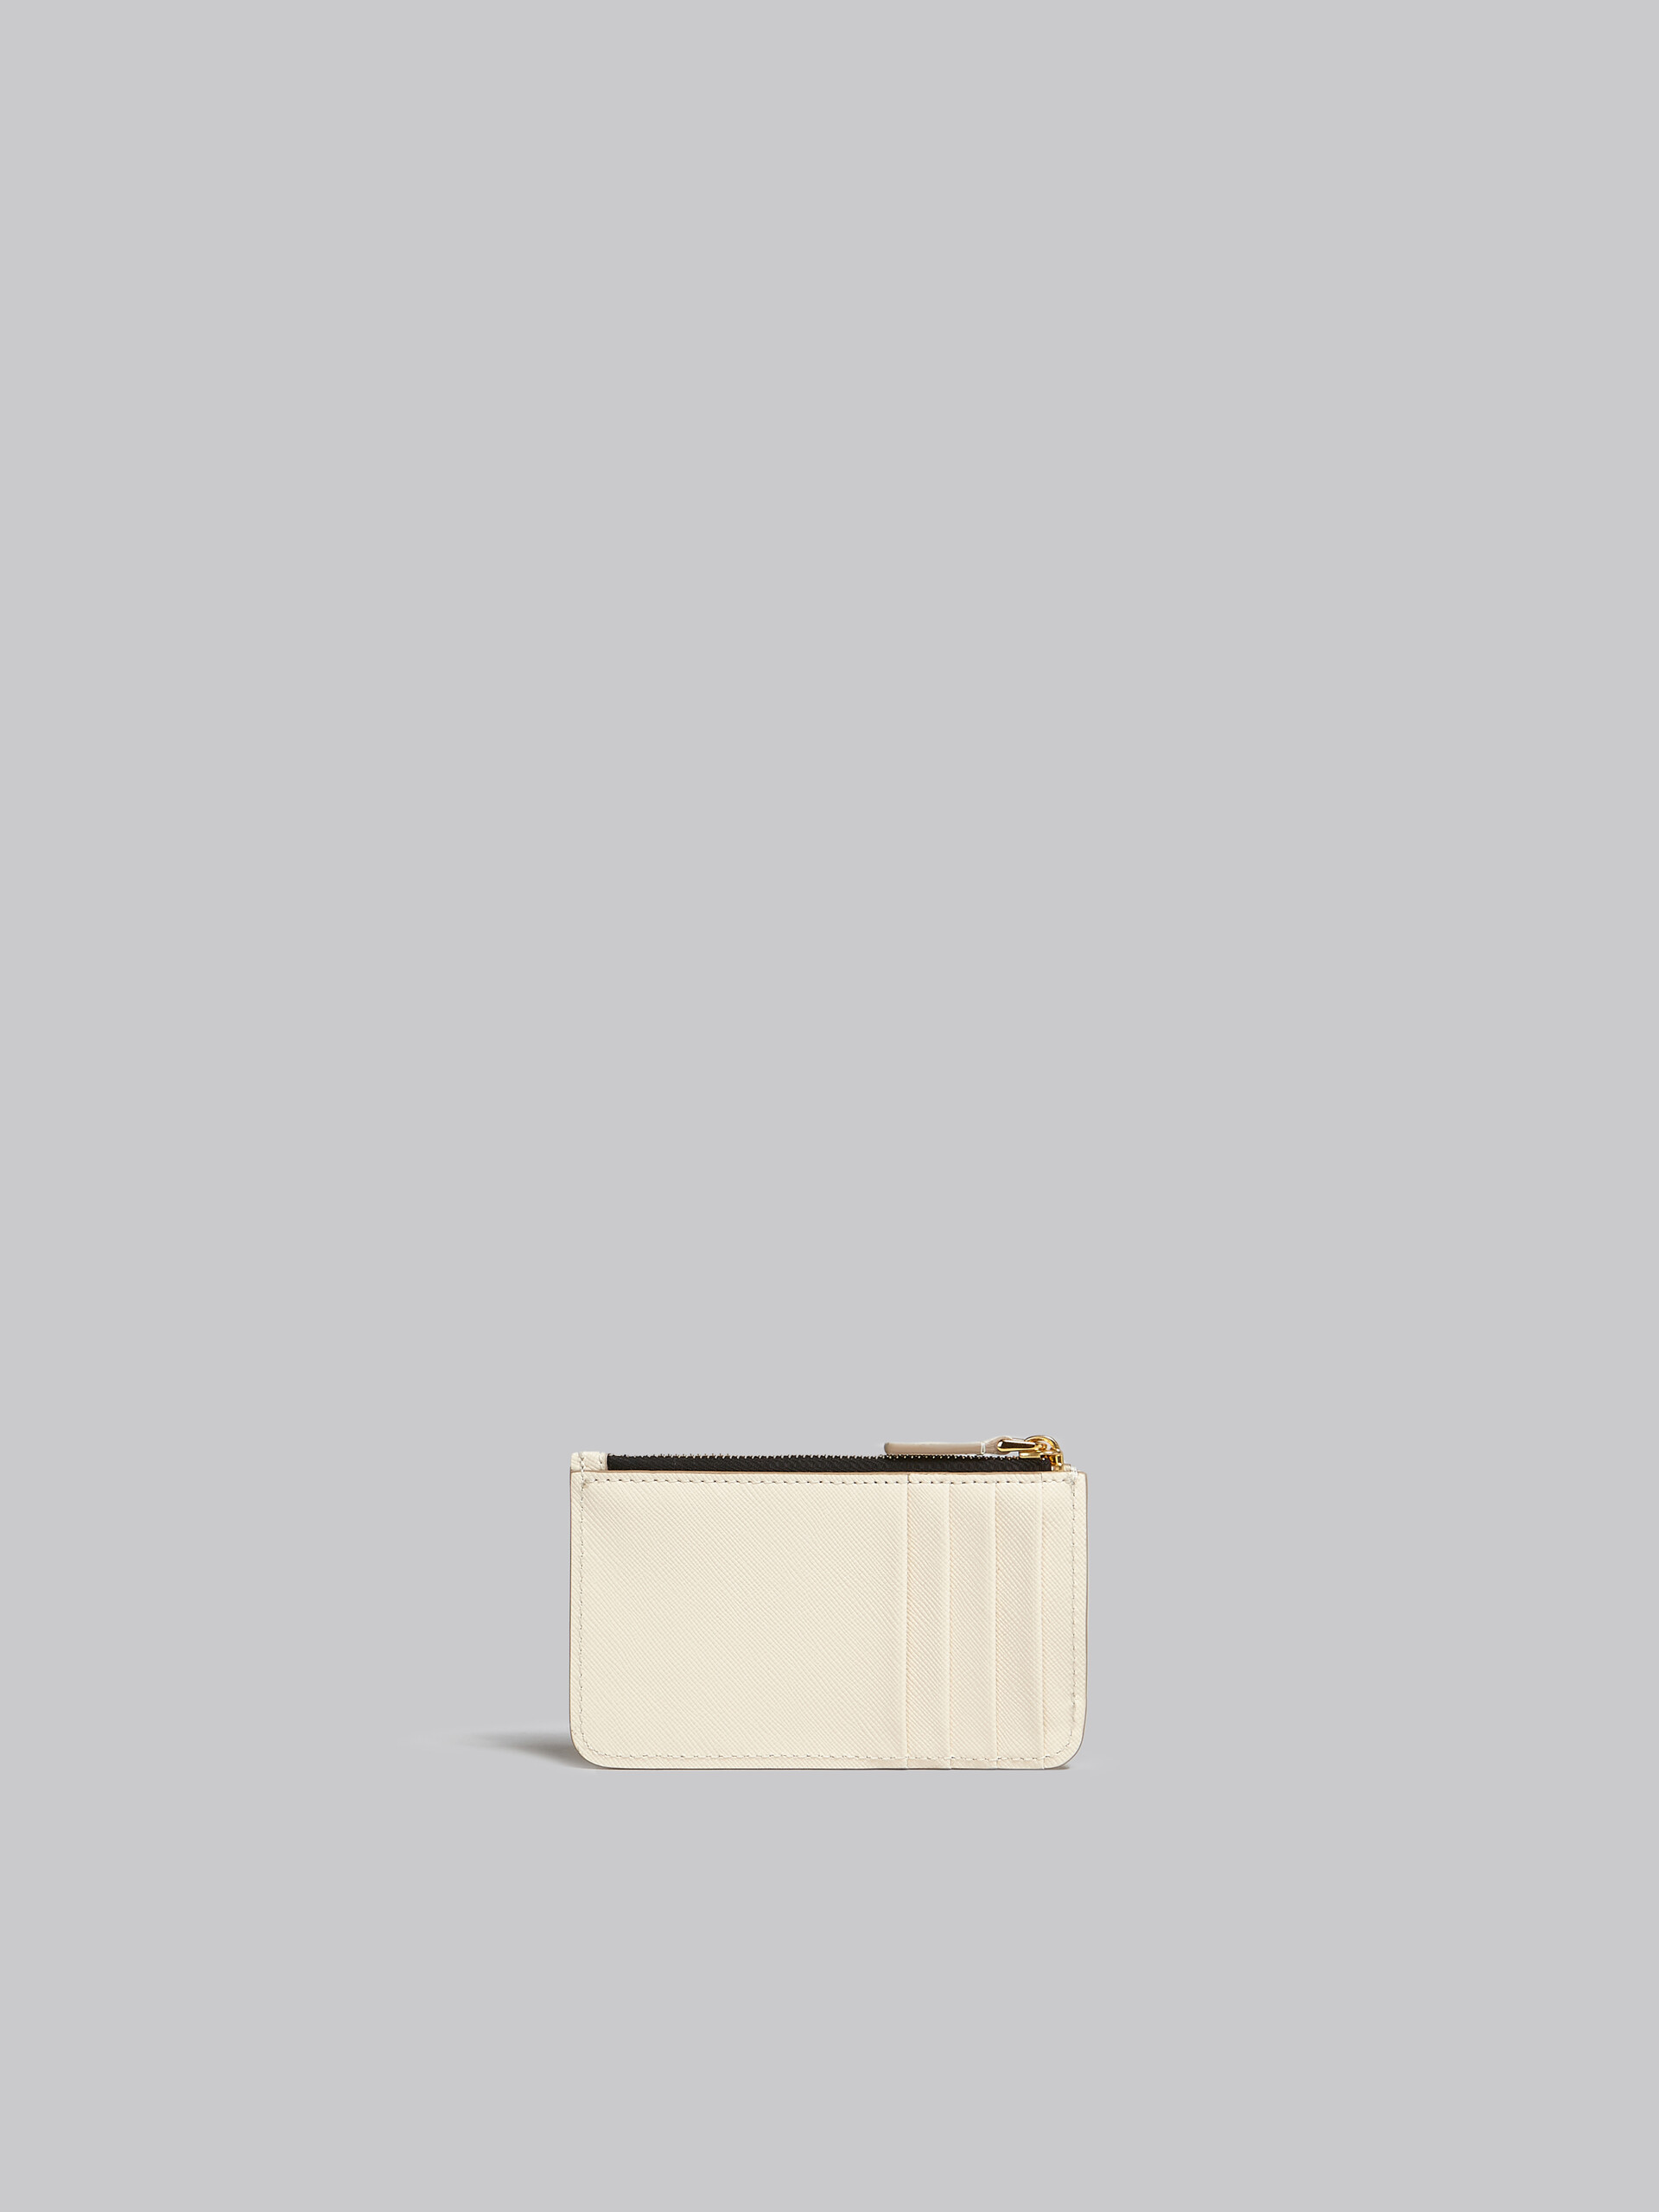 White saffiano leather card case - Wallets - Image 3